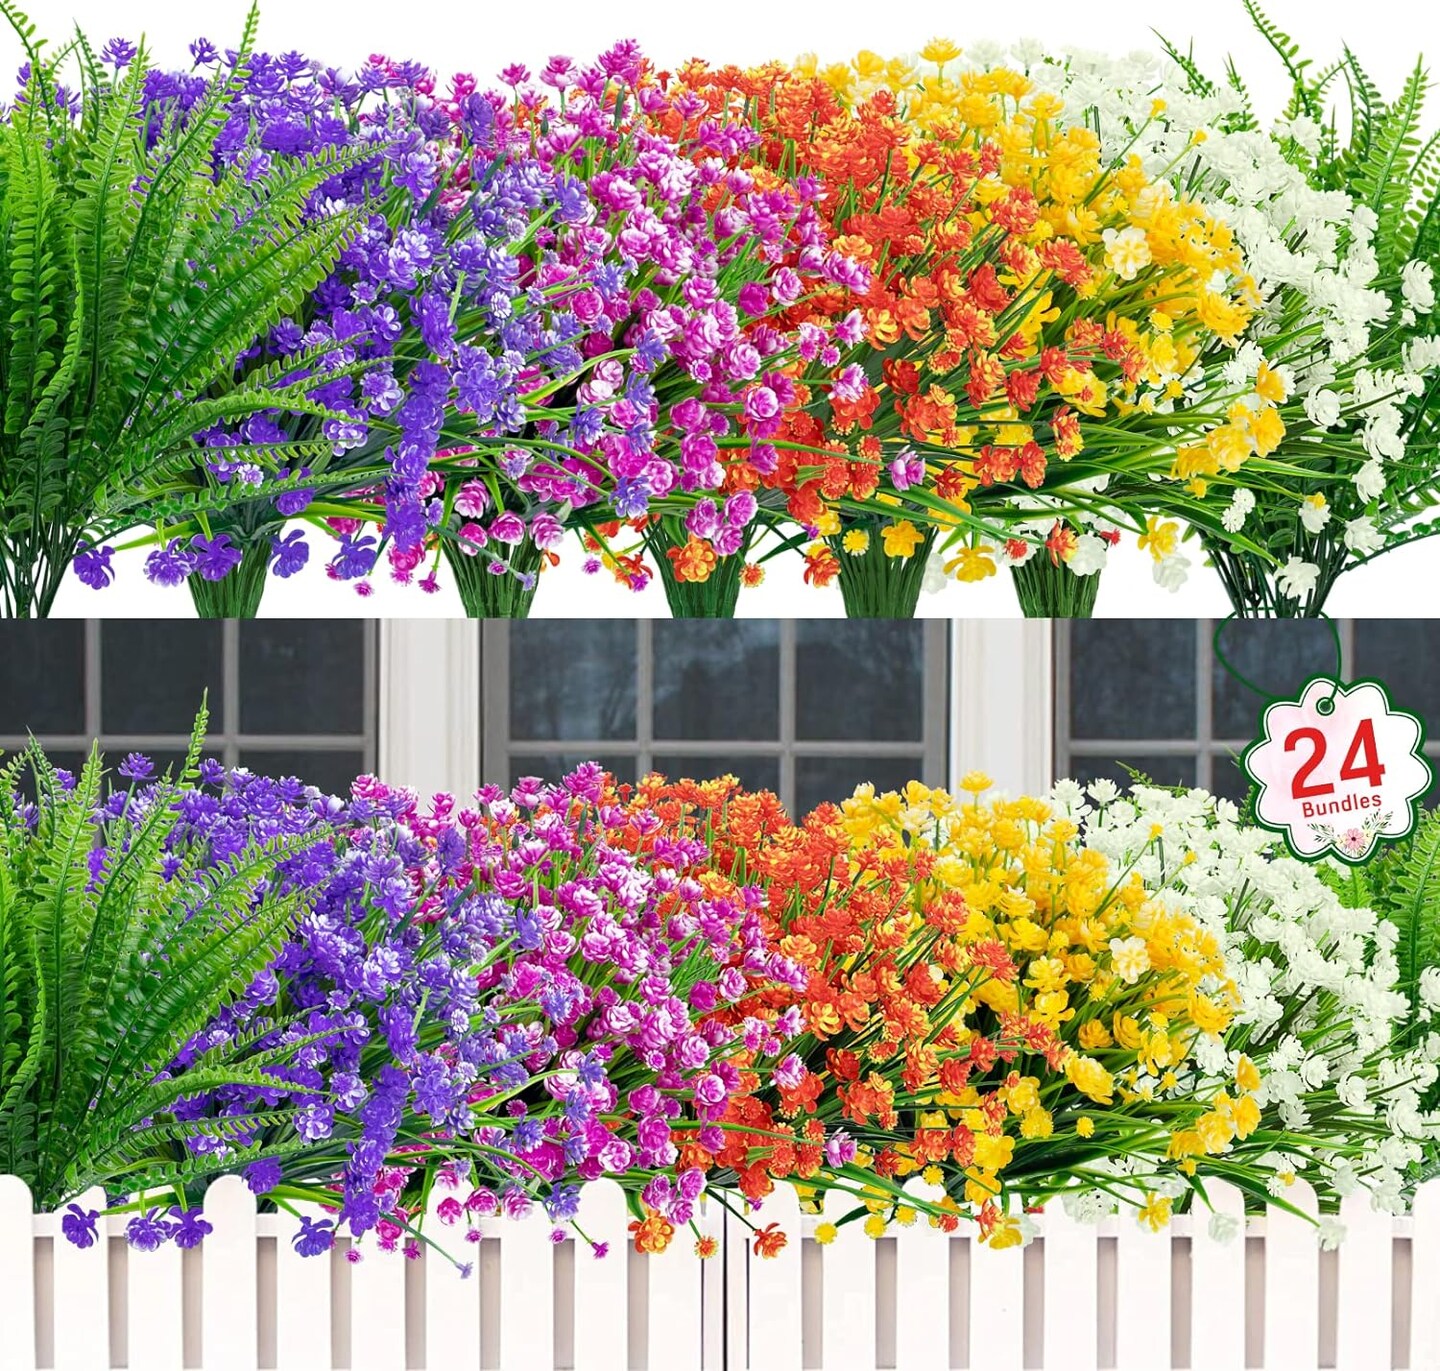 24 Bundles of Artificial Flowers for Outdoor Decoration UV Resistant Fake Plastic Plants Faux Boston Fern Artificial Greenery for Summer Indoor Outdoor Garden Patio Window Box Kitchen Home Decor